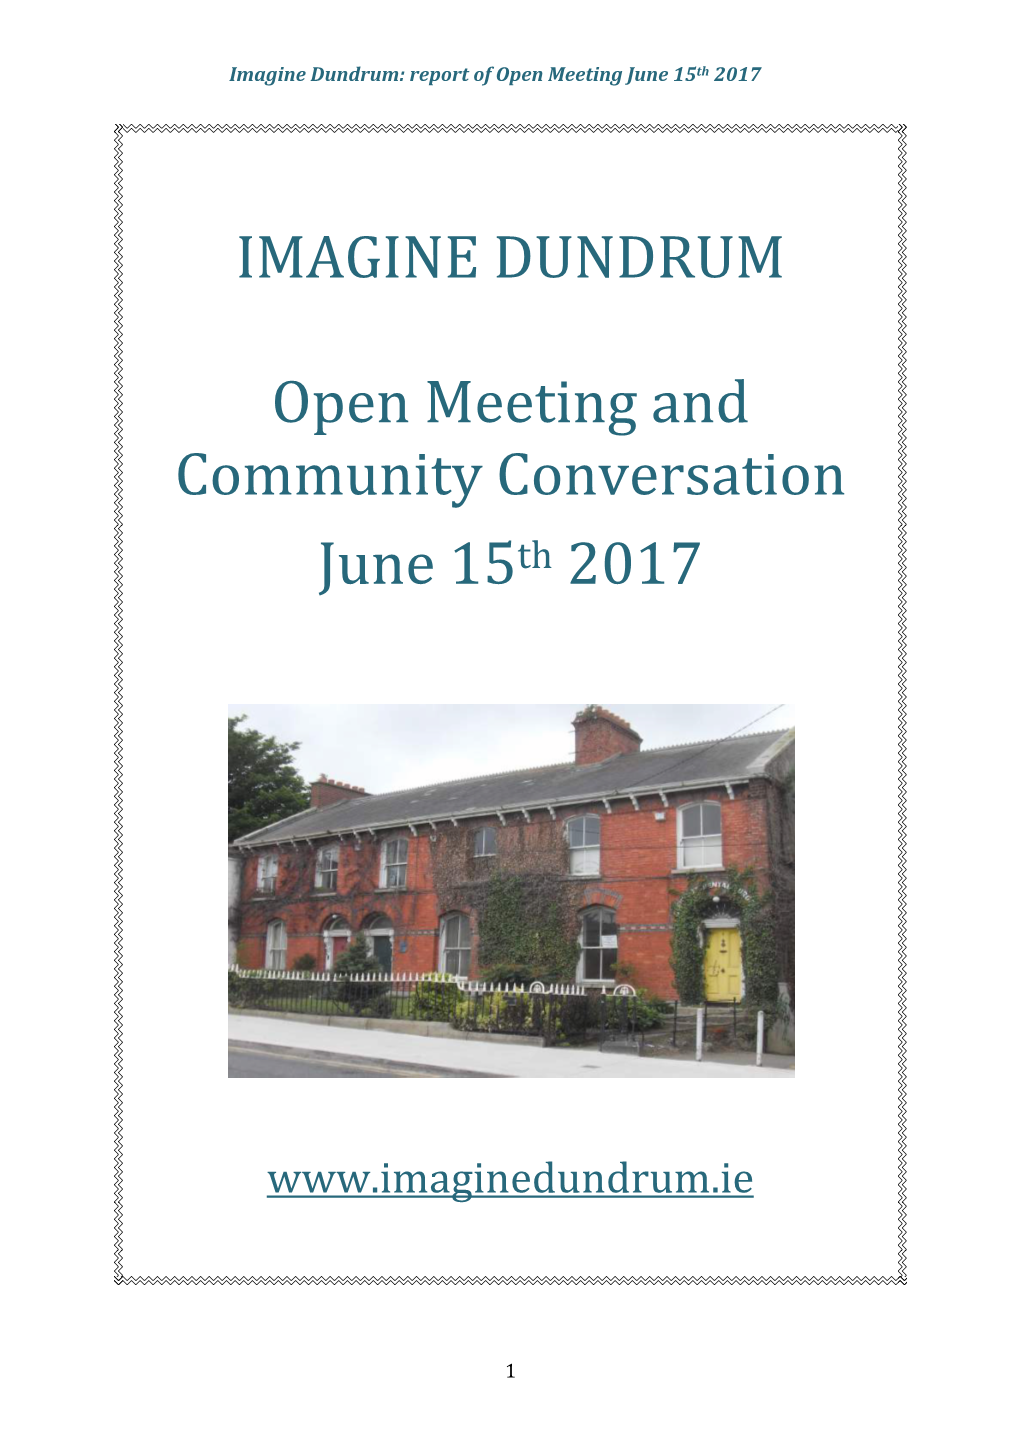 IMAGINE DUNDRUM Open Meeting and Community Conversation June 15Th 2017